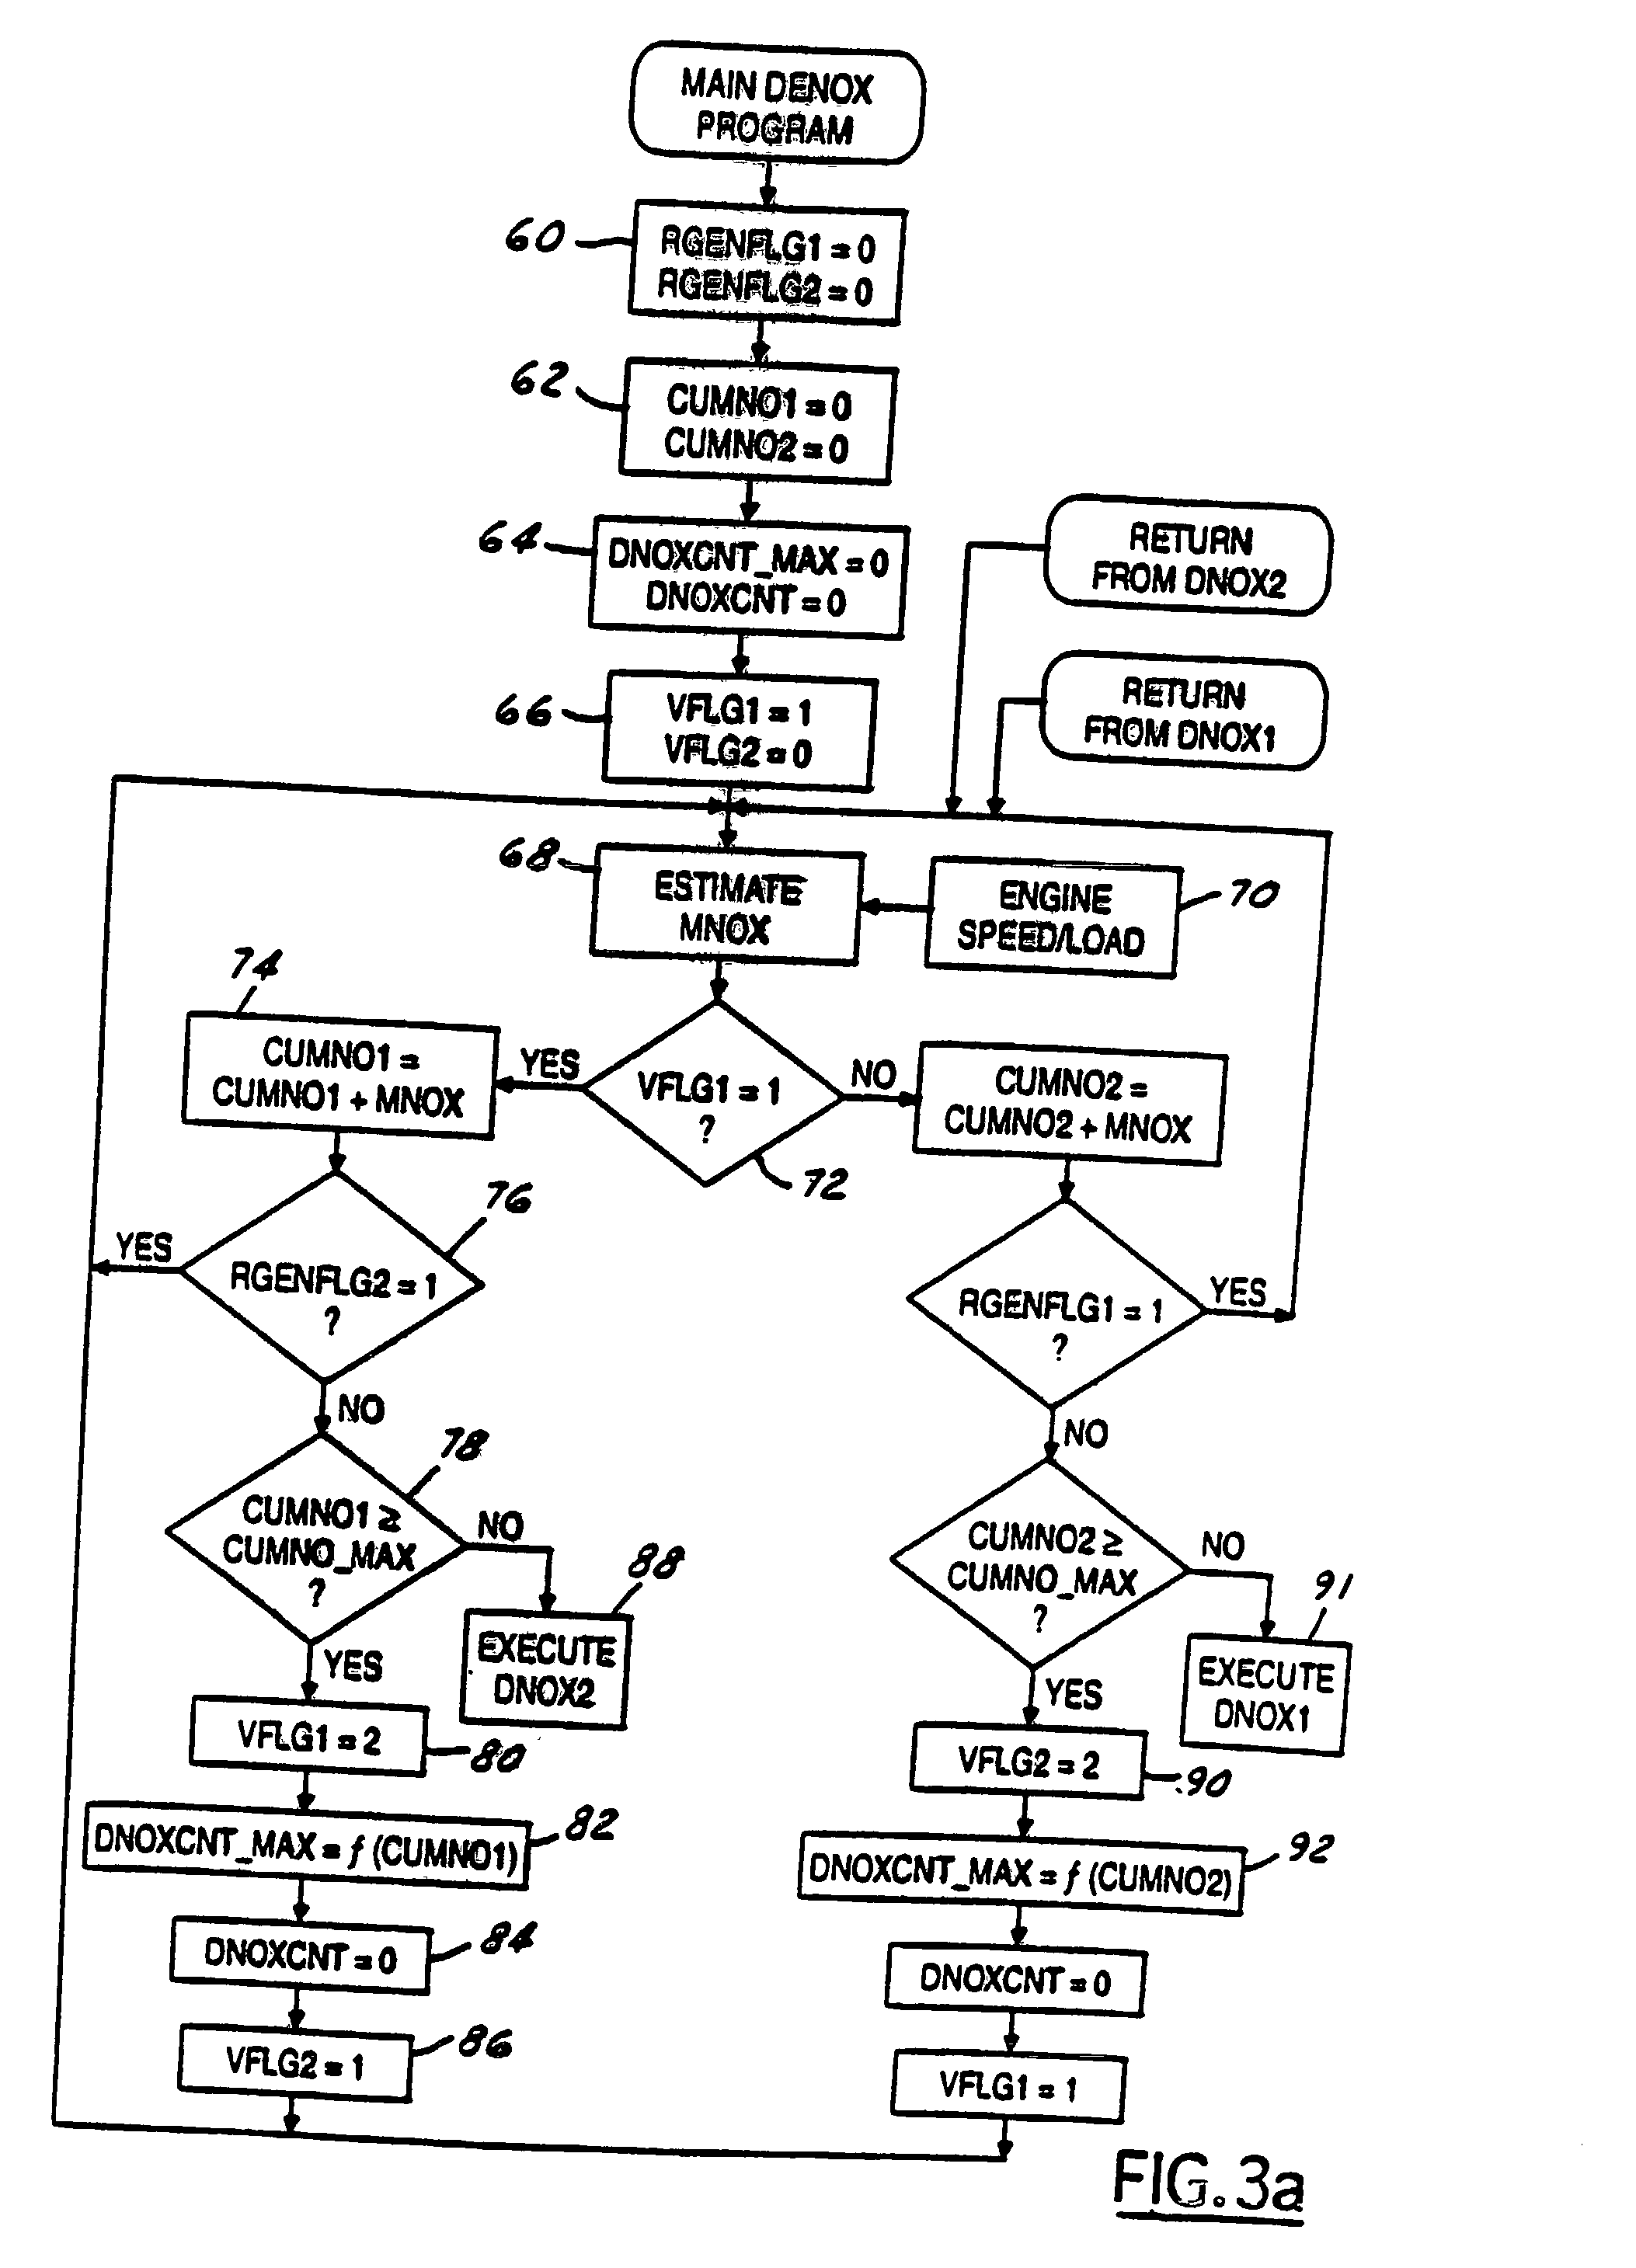 System and method for removing SOx and particulate matter from an emission control device